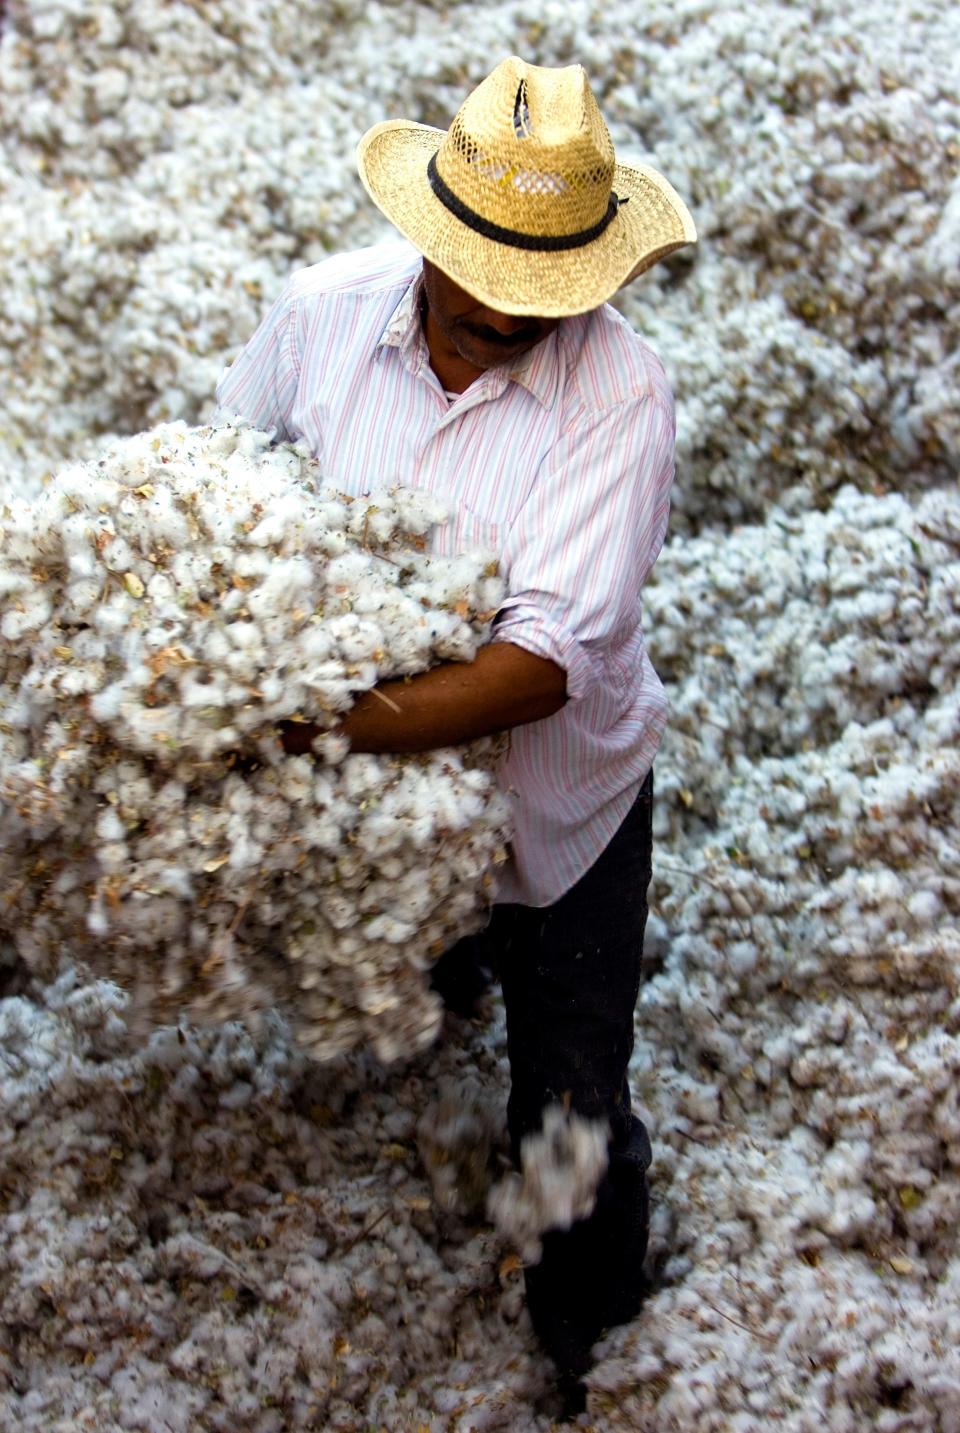 Pima cotton: Pima cotton, known for its elegance and durability, was formulated on experimental farms near Sacaton, but long before it became the go-to fabric for shirts and sheets, it played a key role in World War I.